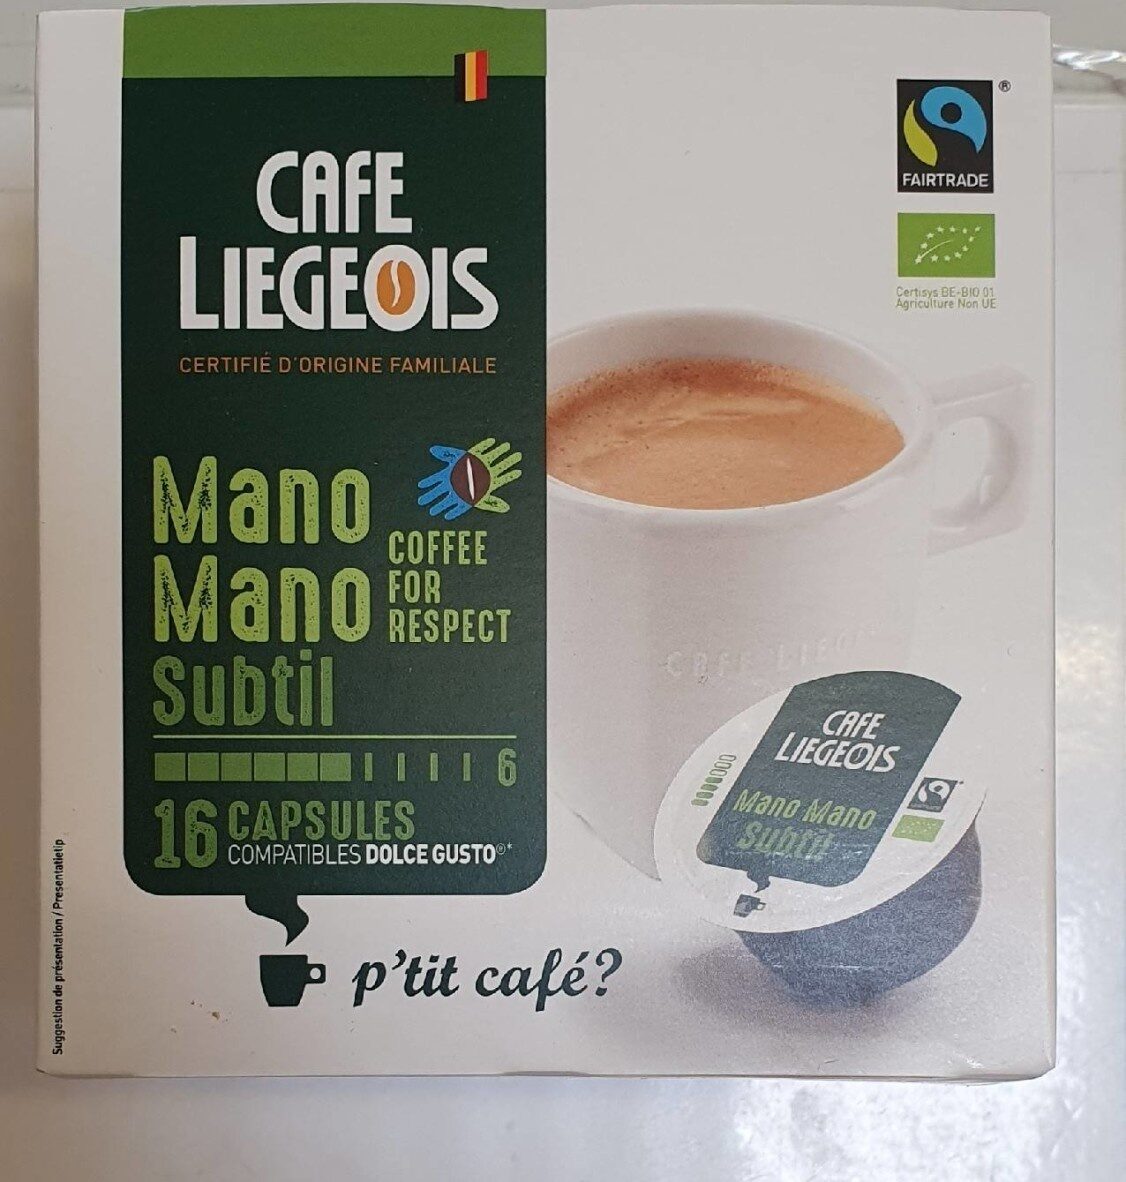 Cafe liegeois mano mano - Product - fr